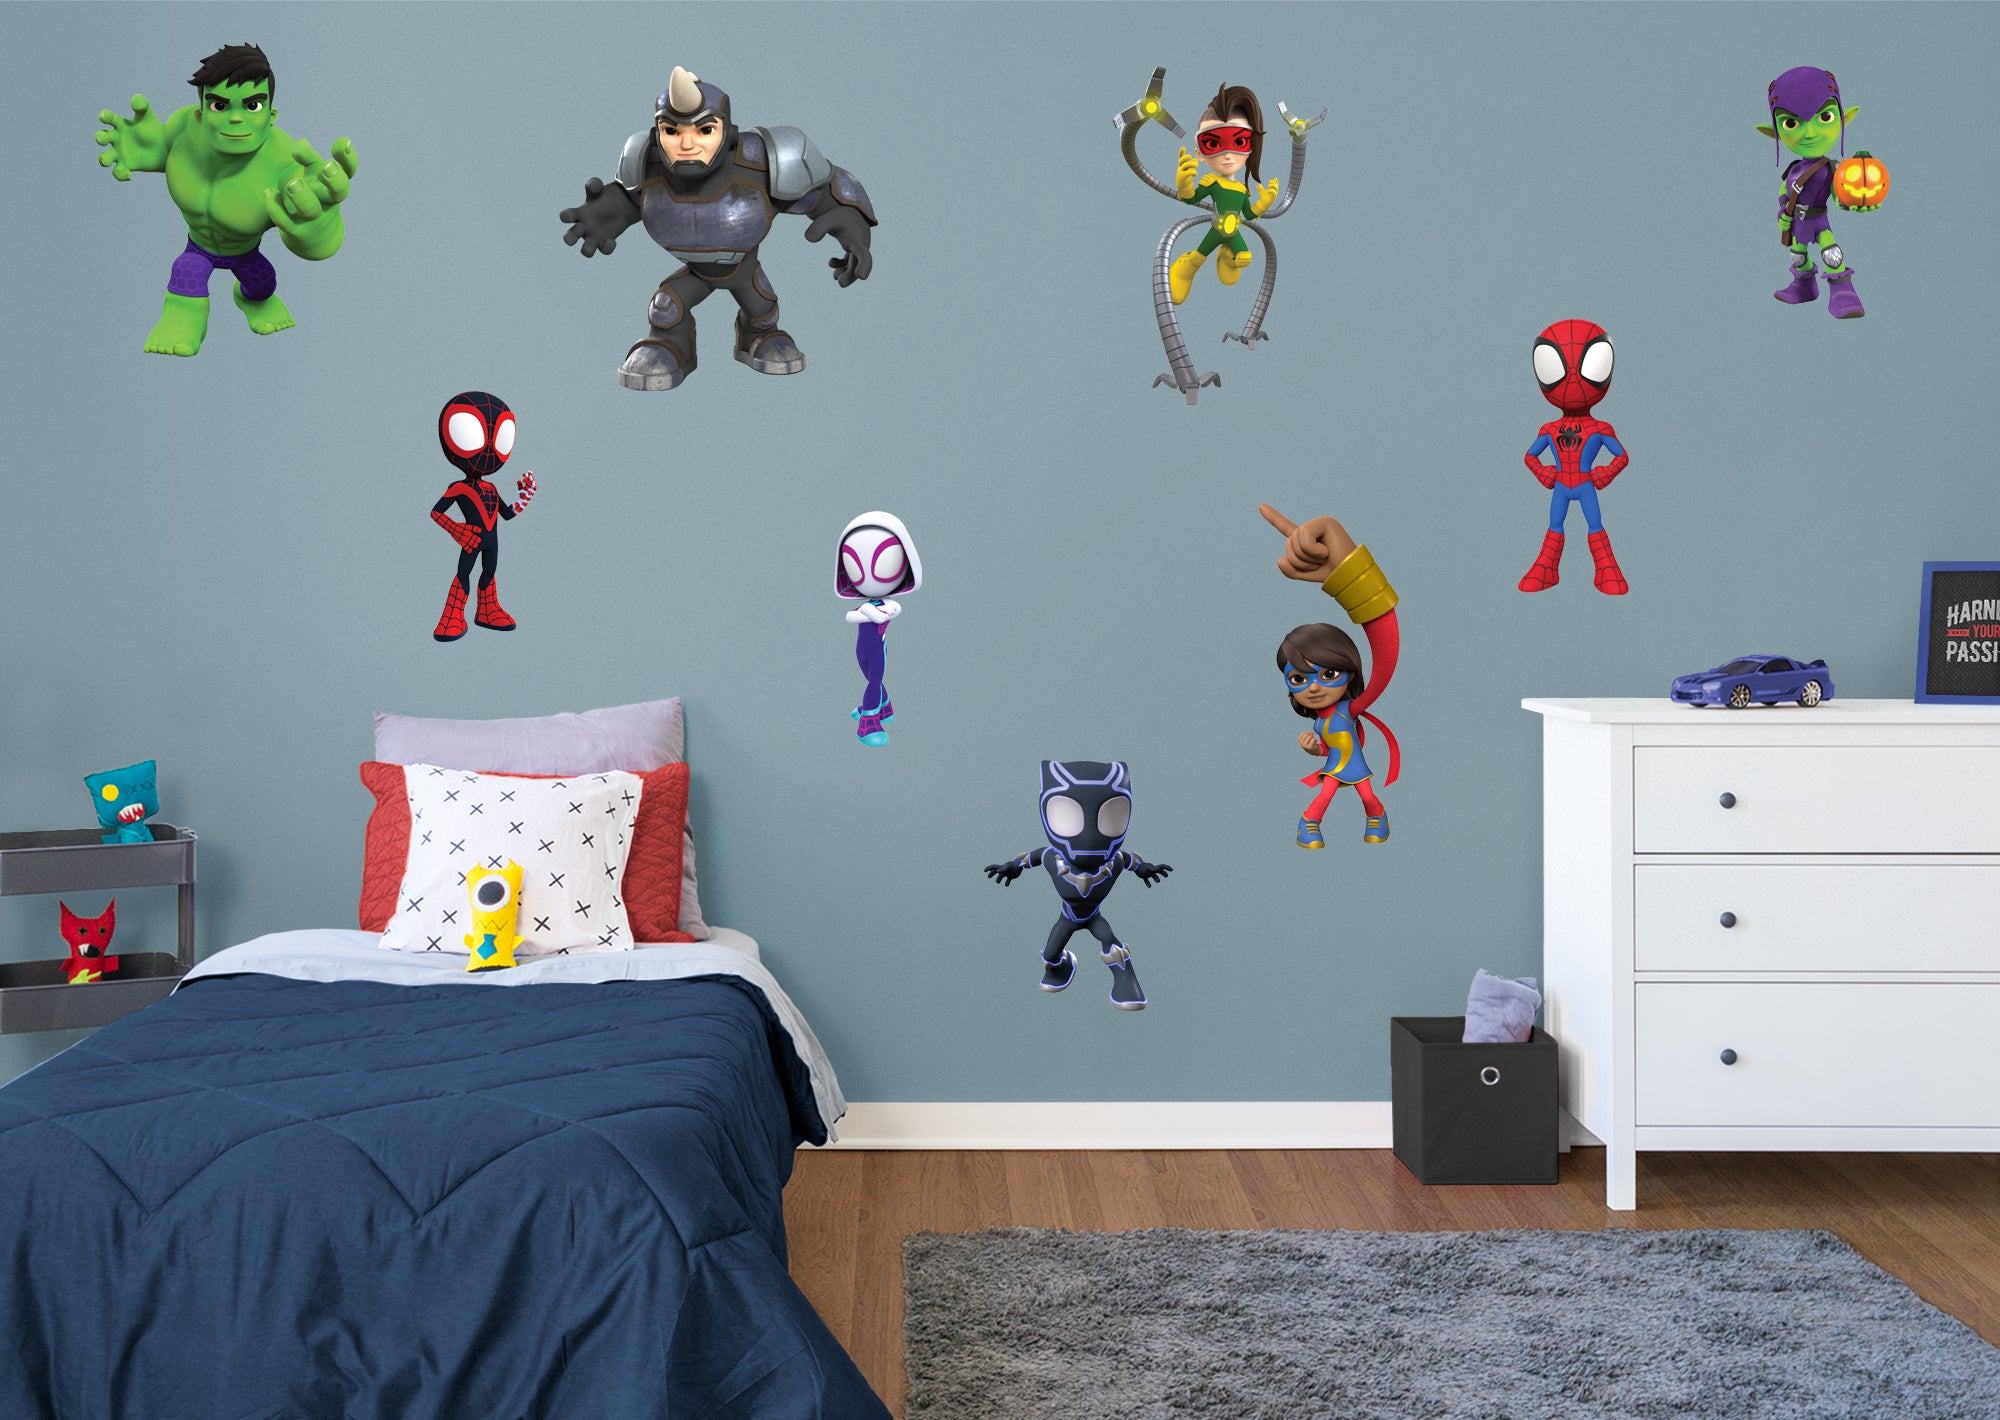 Spidey and His Amazing Friends: All Characters Collection - Marvel Removable Adhesive Wall Decal 9 Wall Decals 11W x 28H